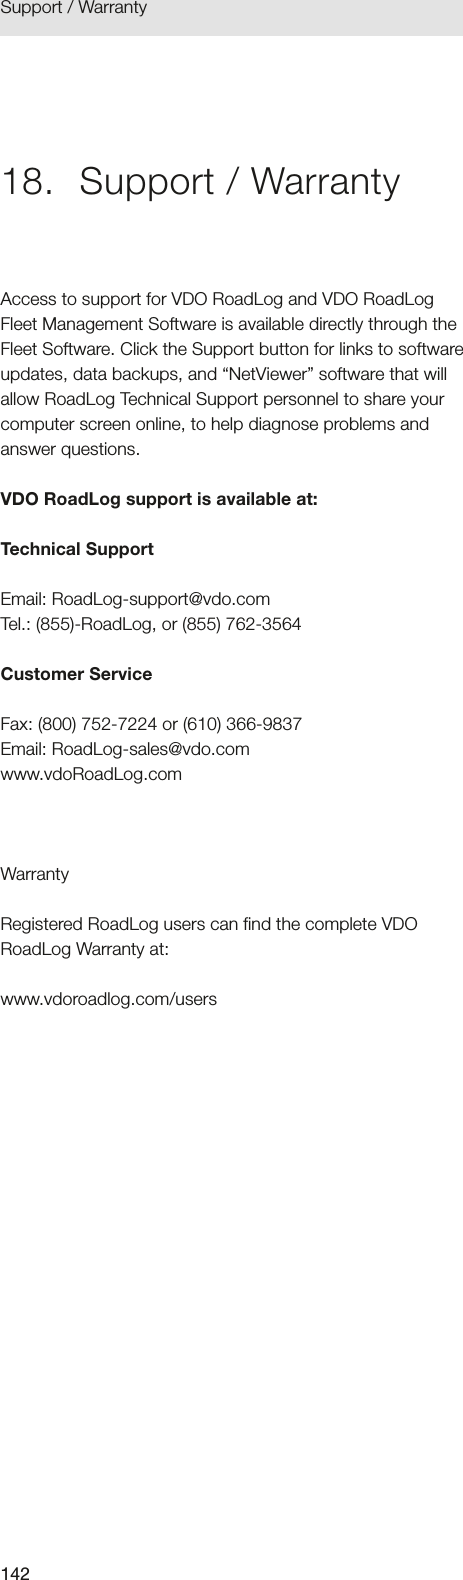 142Support / Warranty 18.  Support / WarrantyAccess to support for VDO RoadLog and VDO RoadLog Fleet Management Software is available directly through the Fleet Software. Click the Support button for links to software updates, data backups, and “NetViewer” software that will allow RoadLog Technical Support personnel to share your computer screen online, to help diagnose problems and answer questions.VDO RoadLog support is available at:Technical SupportEmail: RoadLog-support@vdo.com Tel.: (855)-RoadLog, or (855) 762-3564Customer ServiceFax: (800) 752-7224 or (610) 366-9837 Email: RoadLog-sales@vdo.com  www.vdoRoadLog.comWarrantyRegistered RoadLog users can find the complete VDO RoadLog Warranty at:www.vdoroadlog.com/users